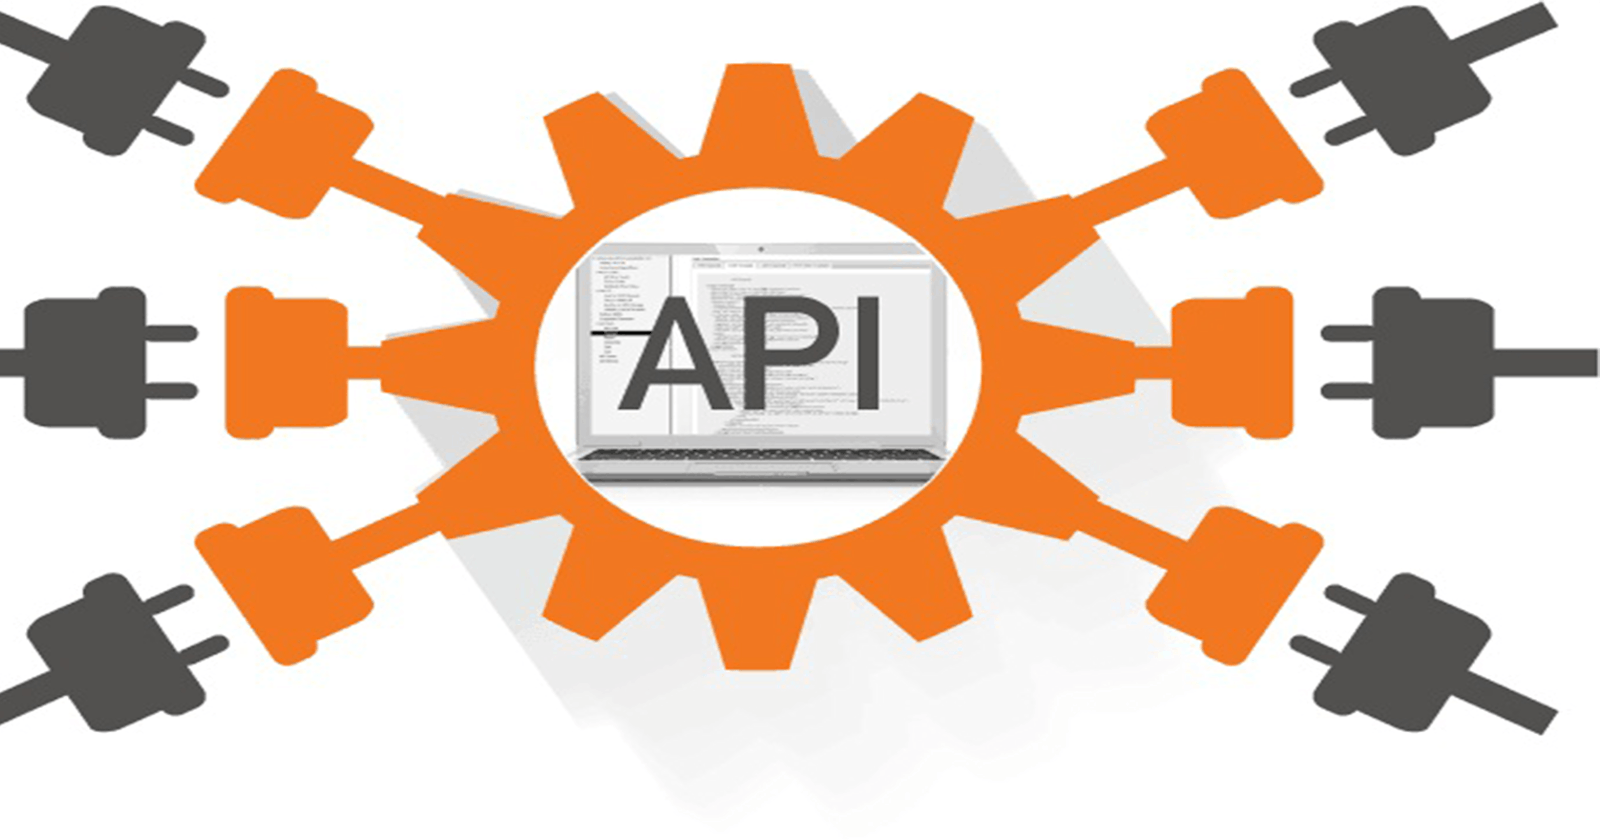 4 key facts about an API to get started